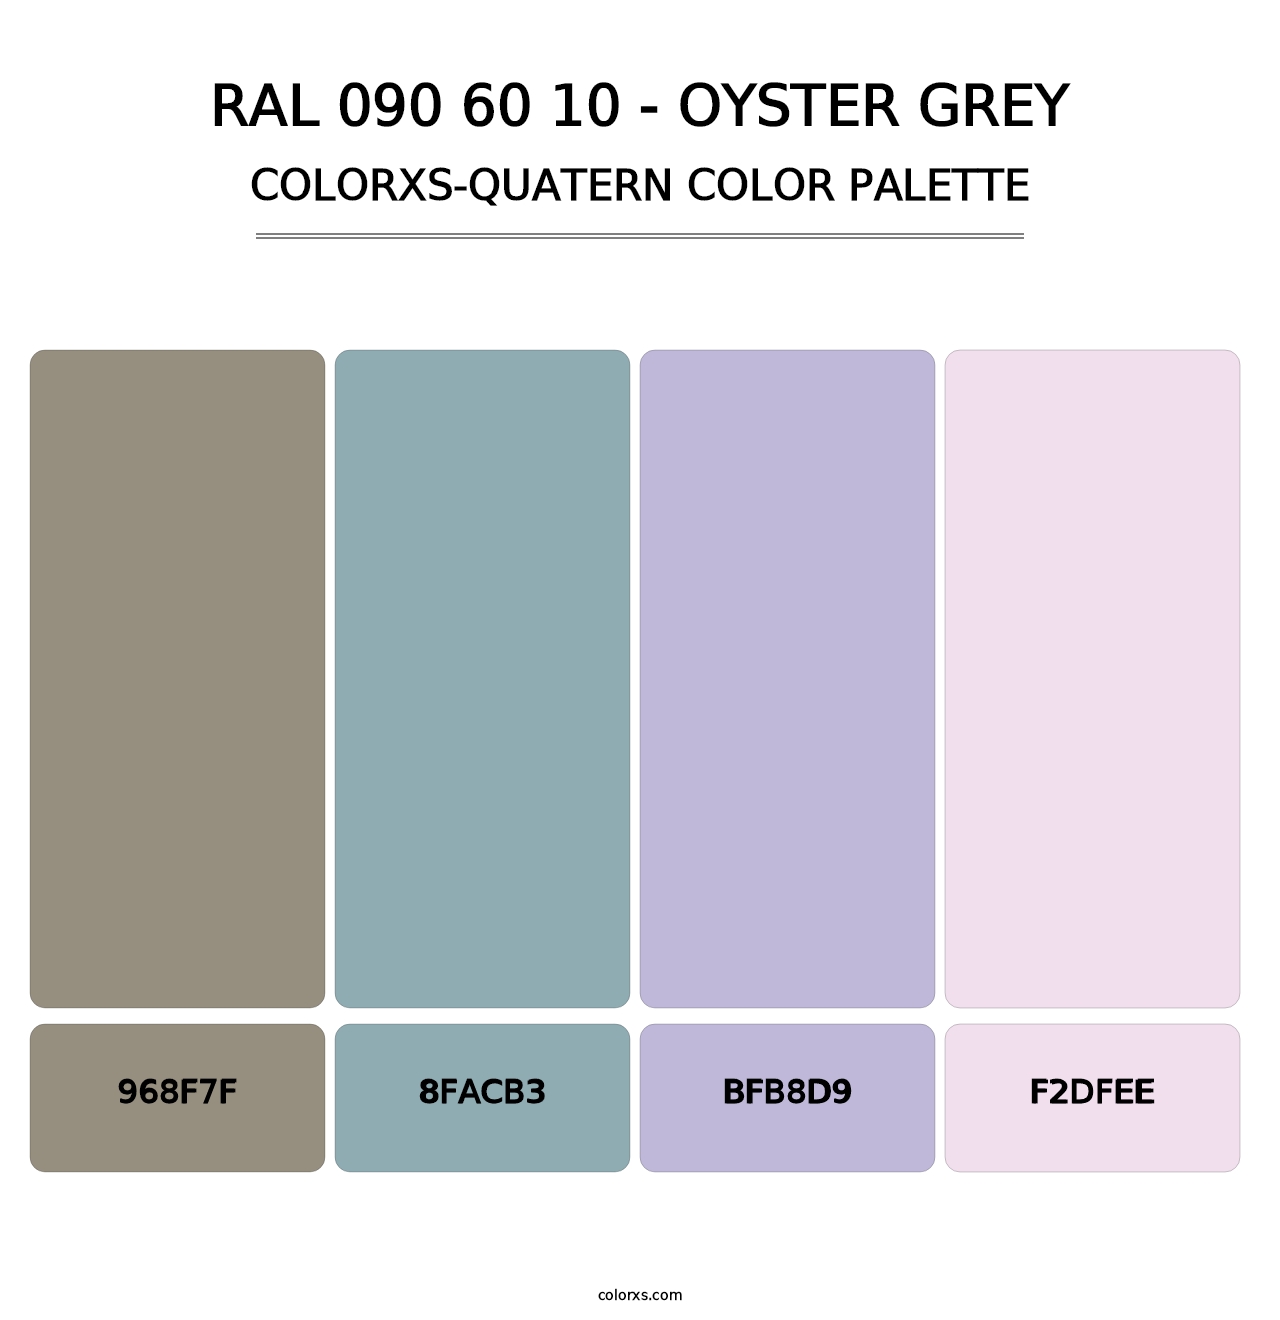 RAL 090 60 10 - Oyster Grey - Colorxs Quatern Palette